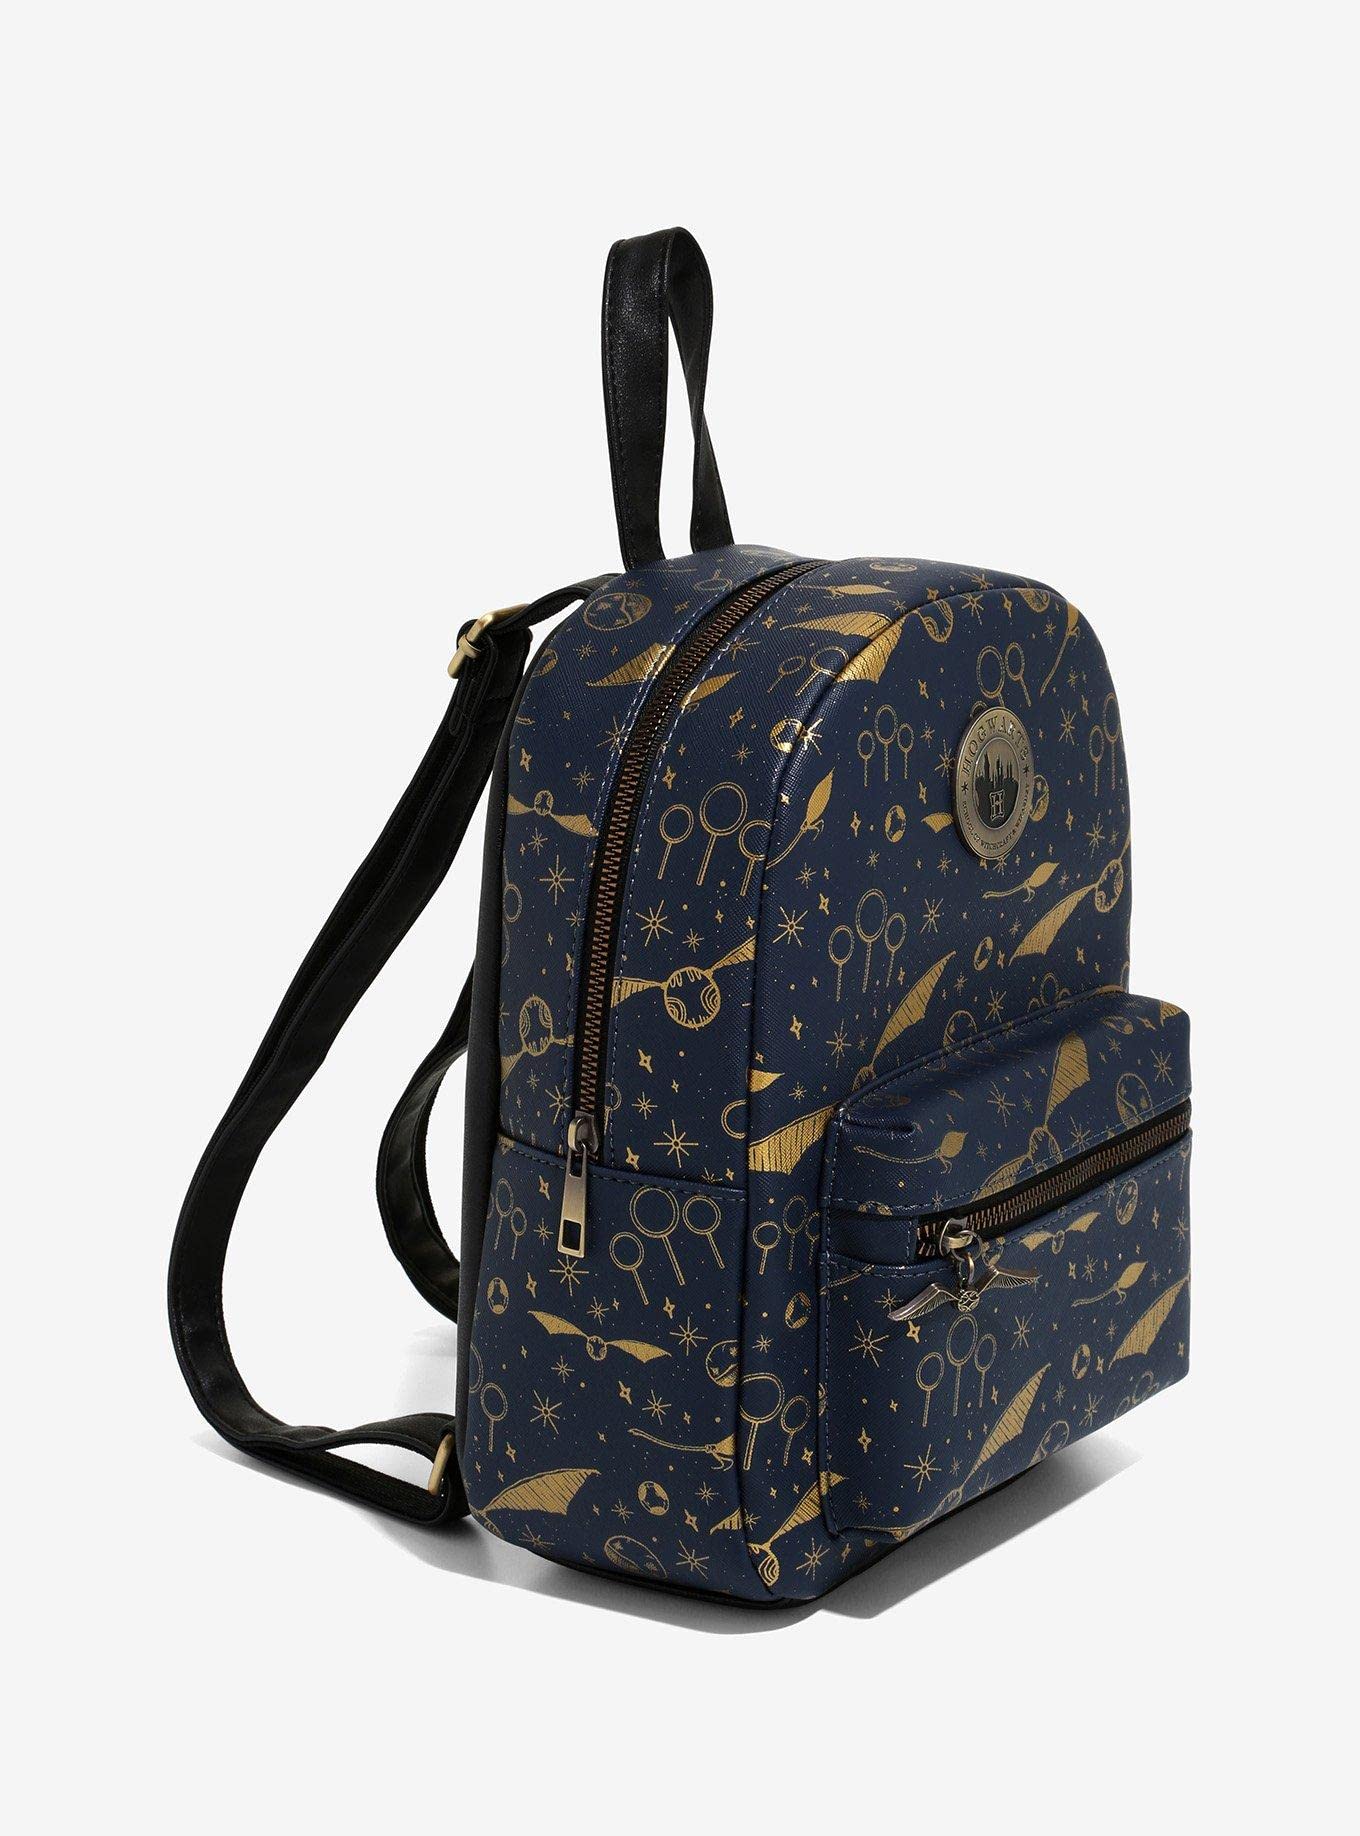 Hot Topic Exclusive: Harry Potter Navy & Gold Quidditch Mini Backpack - Officially Licensed for Wizards, Exclusive to Hot Topic!